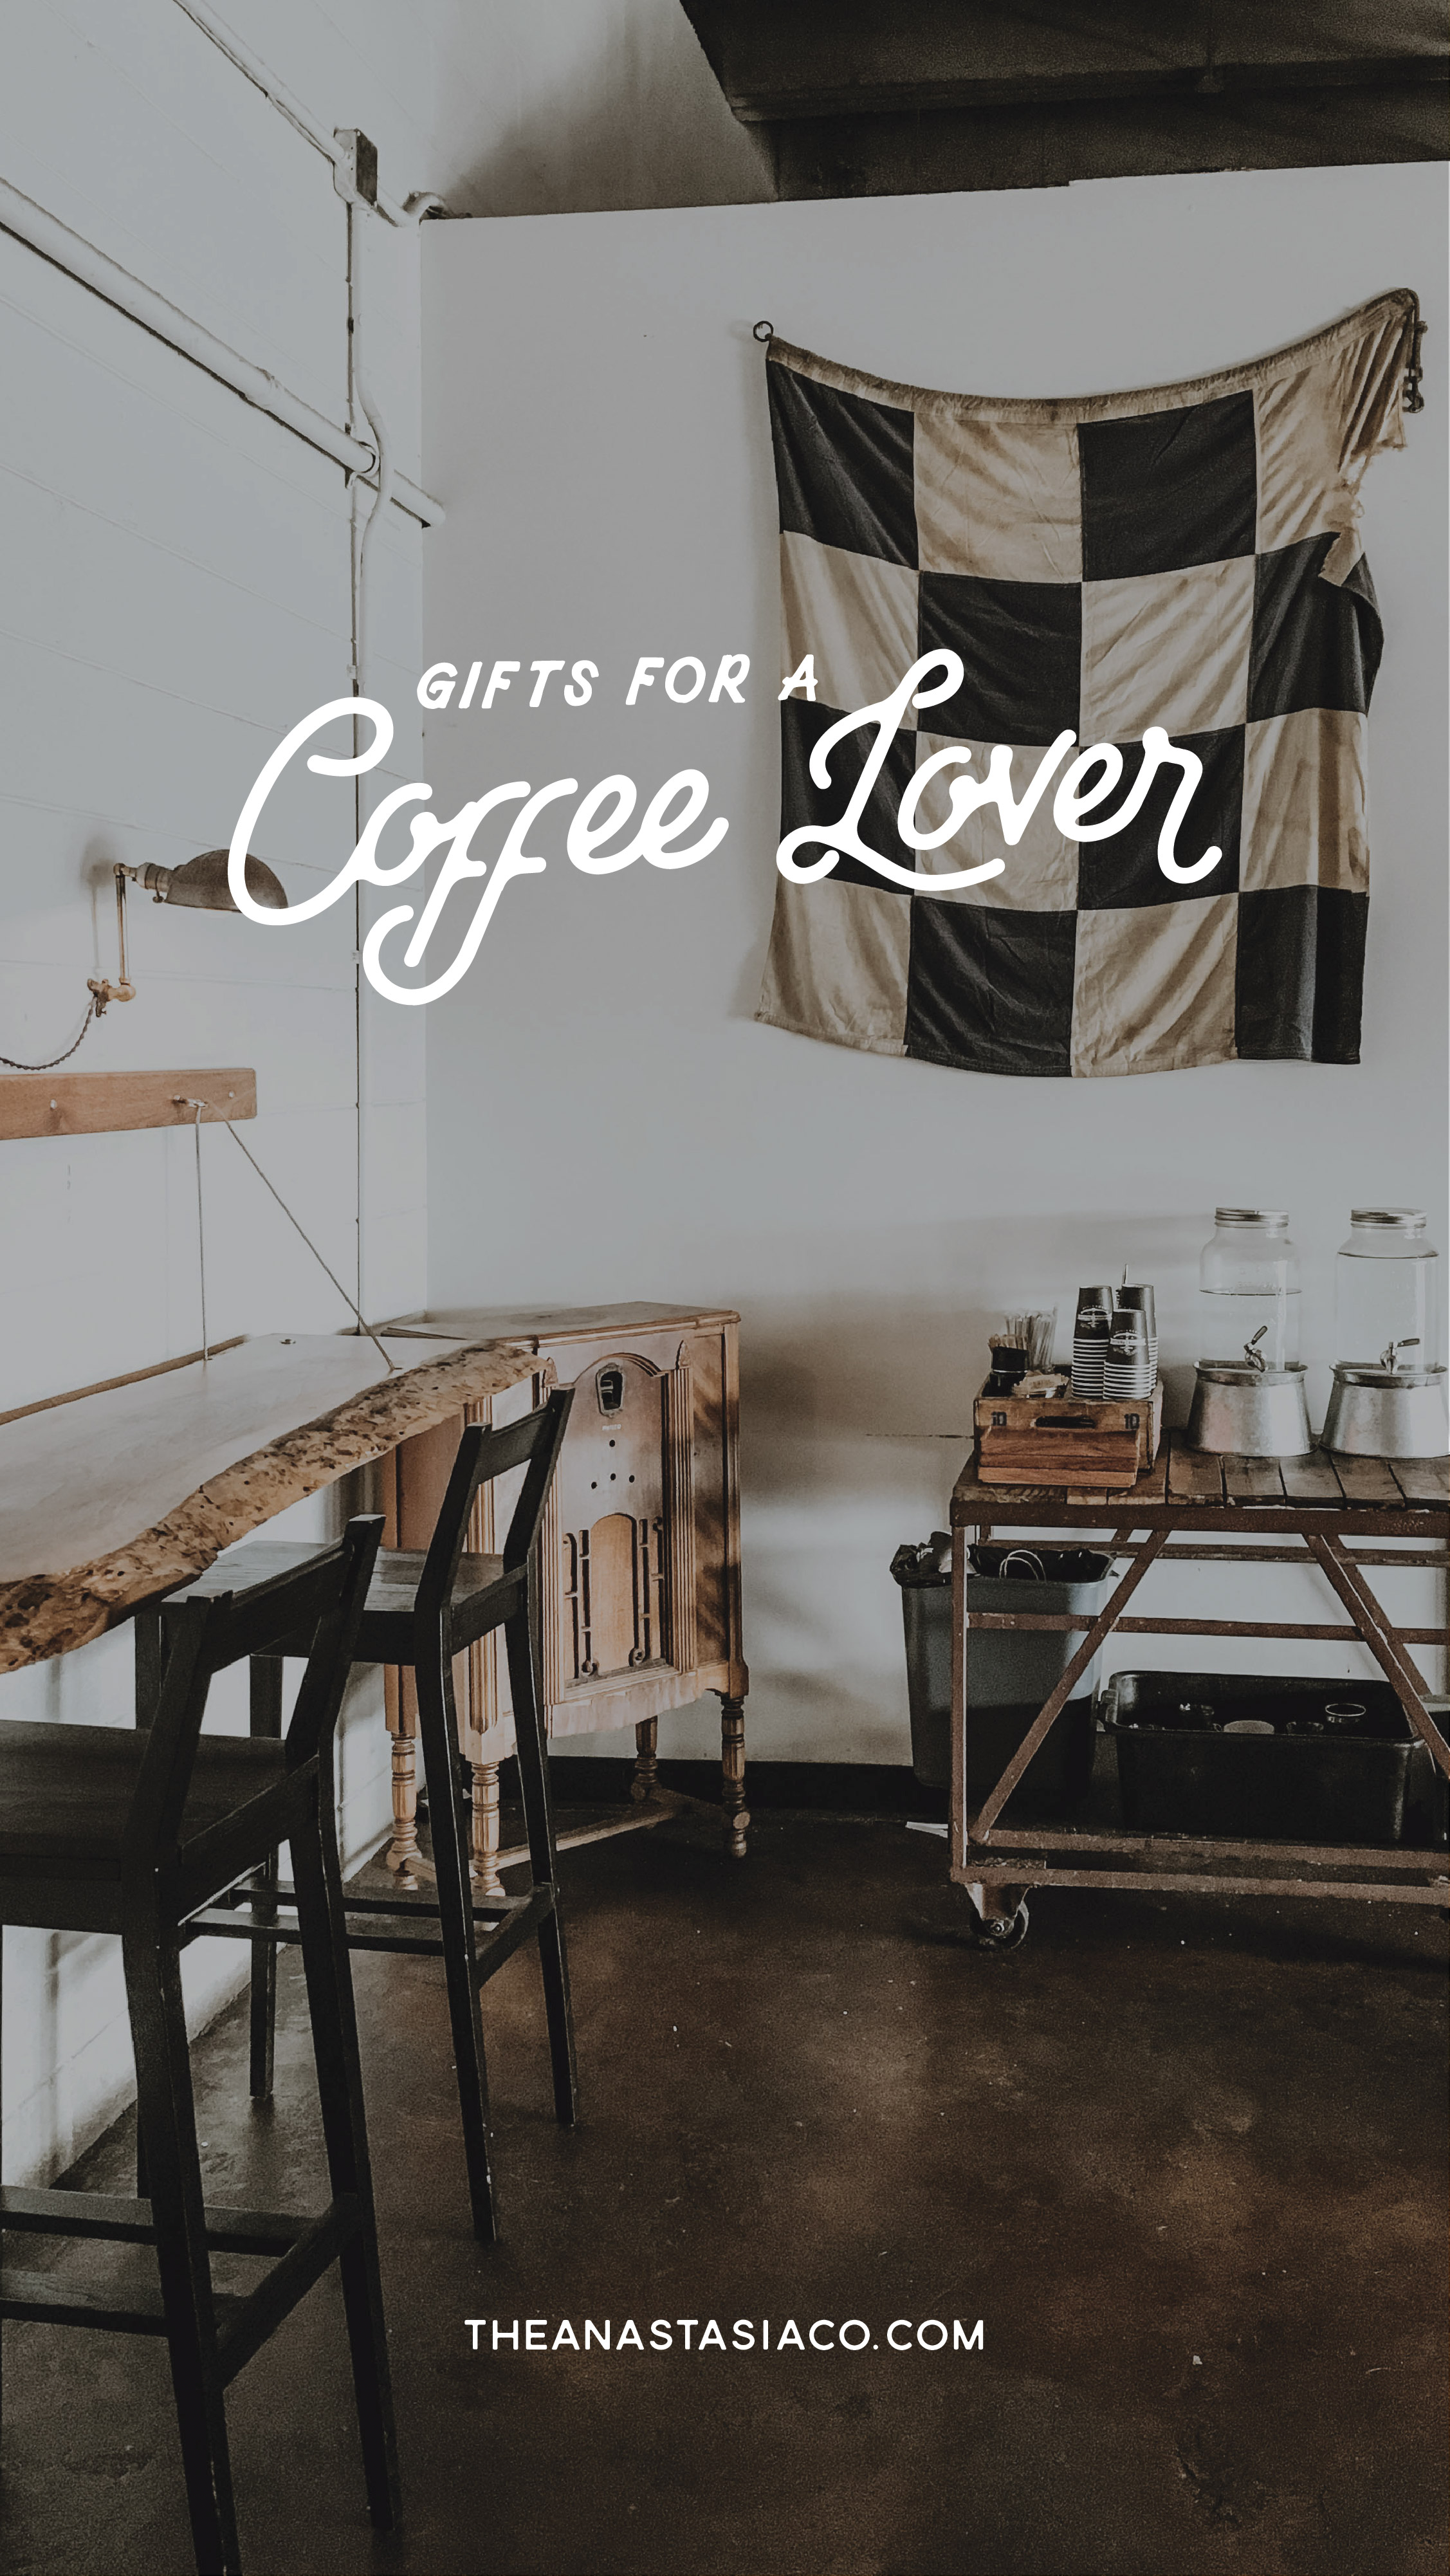 Gifts for a Coffee Lover: We all have that friend who just can’t function without their morning cup of coffee. While coffee shop gift cards and high quality coffee beans are great gifts, we’ve brewed up some more unique gifts for coffee lovers! / theanastasiaco.com